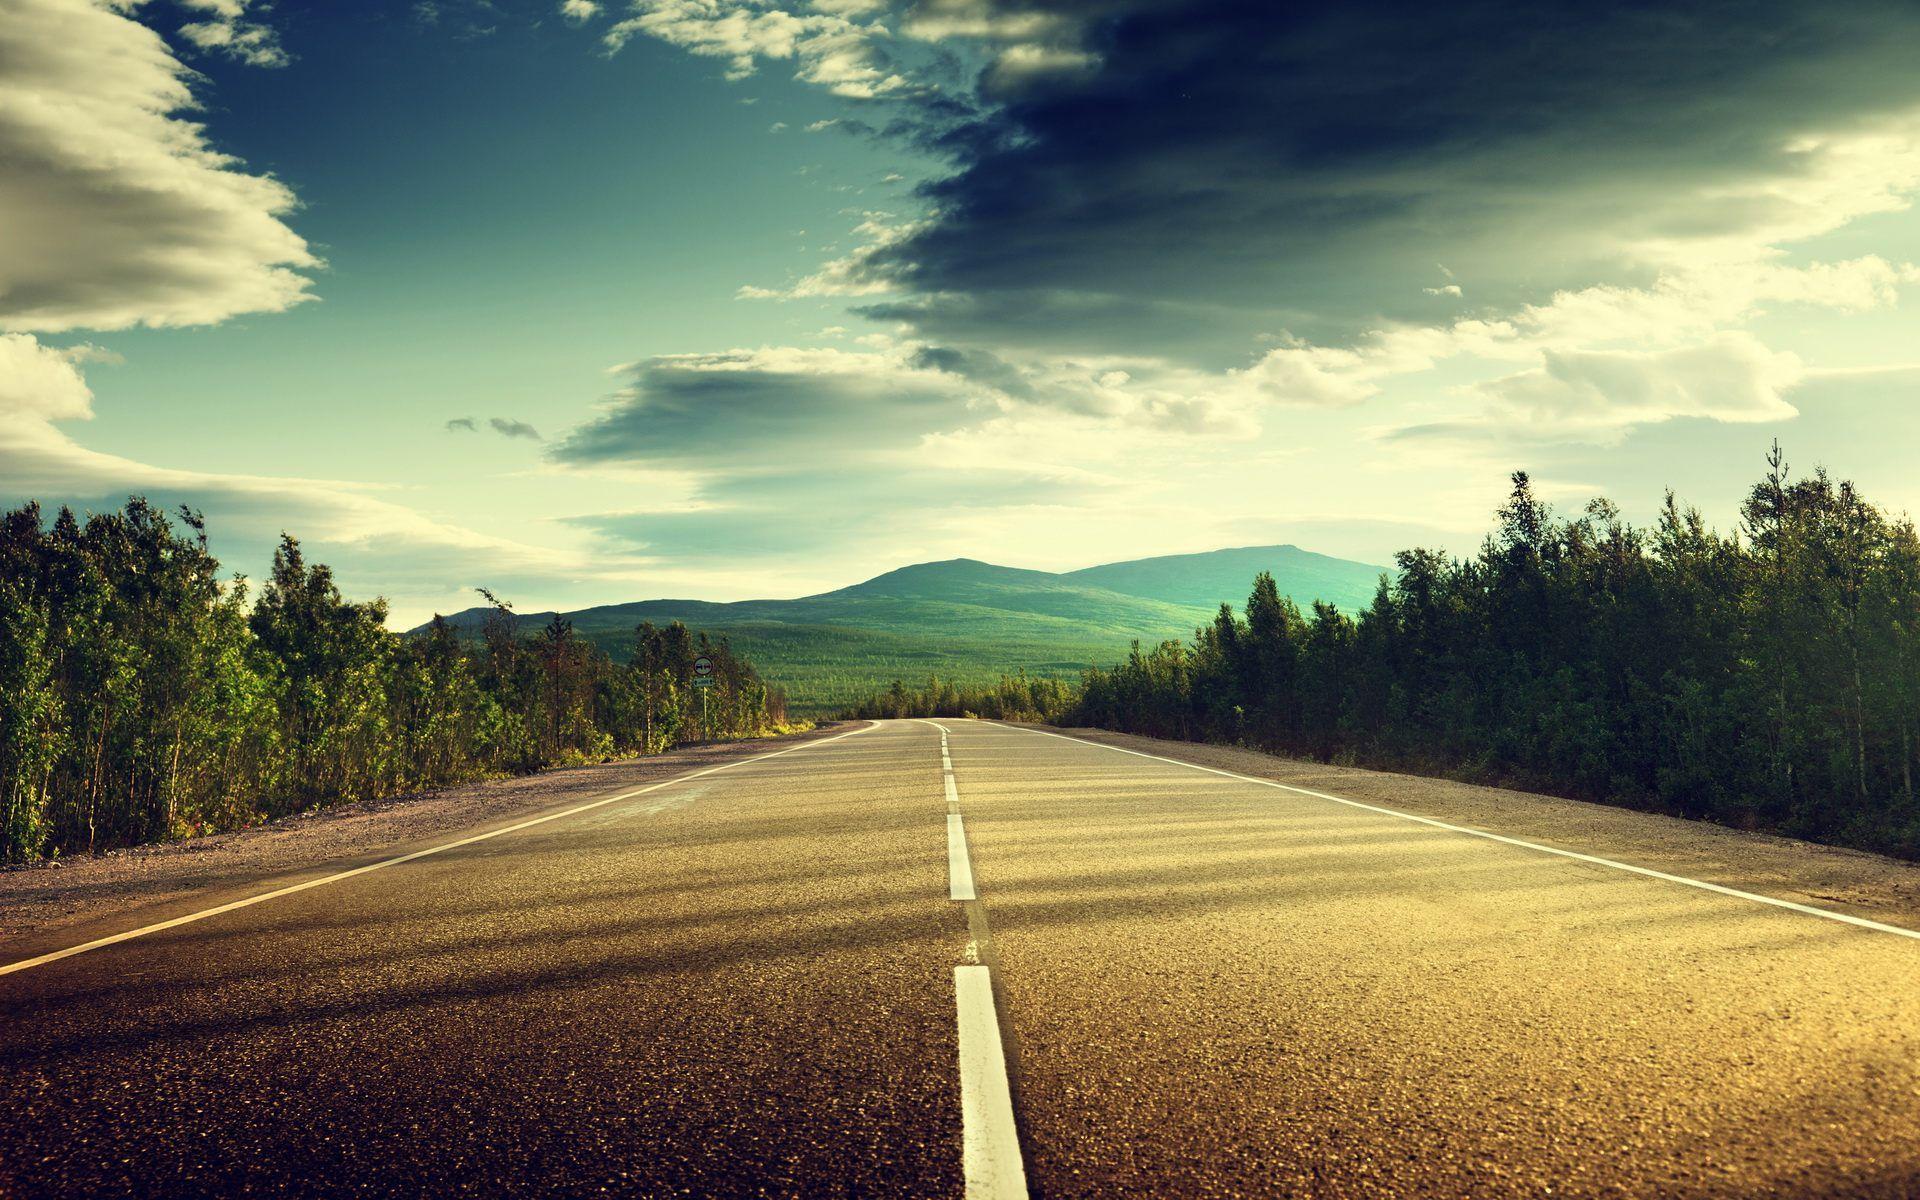 Road Wallpaper High Quality Resolution